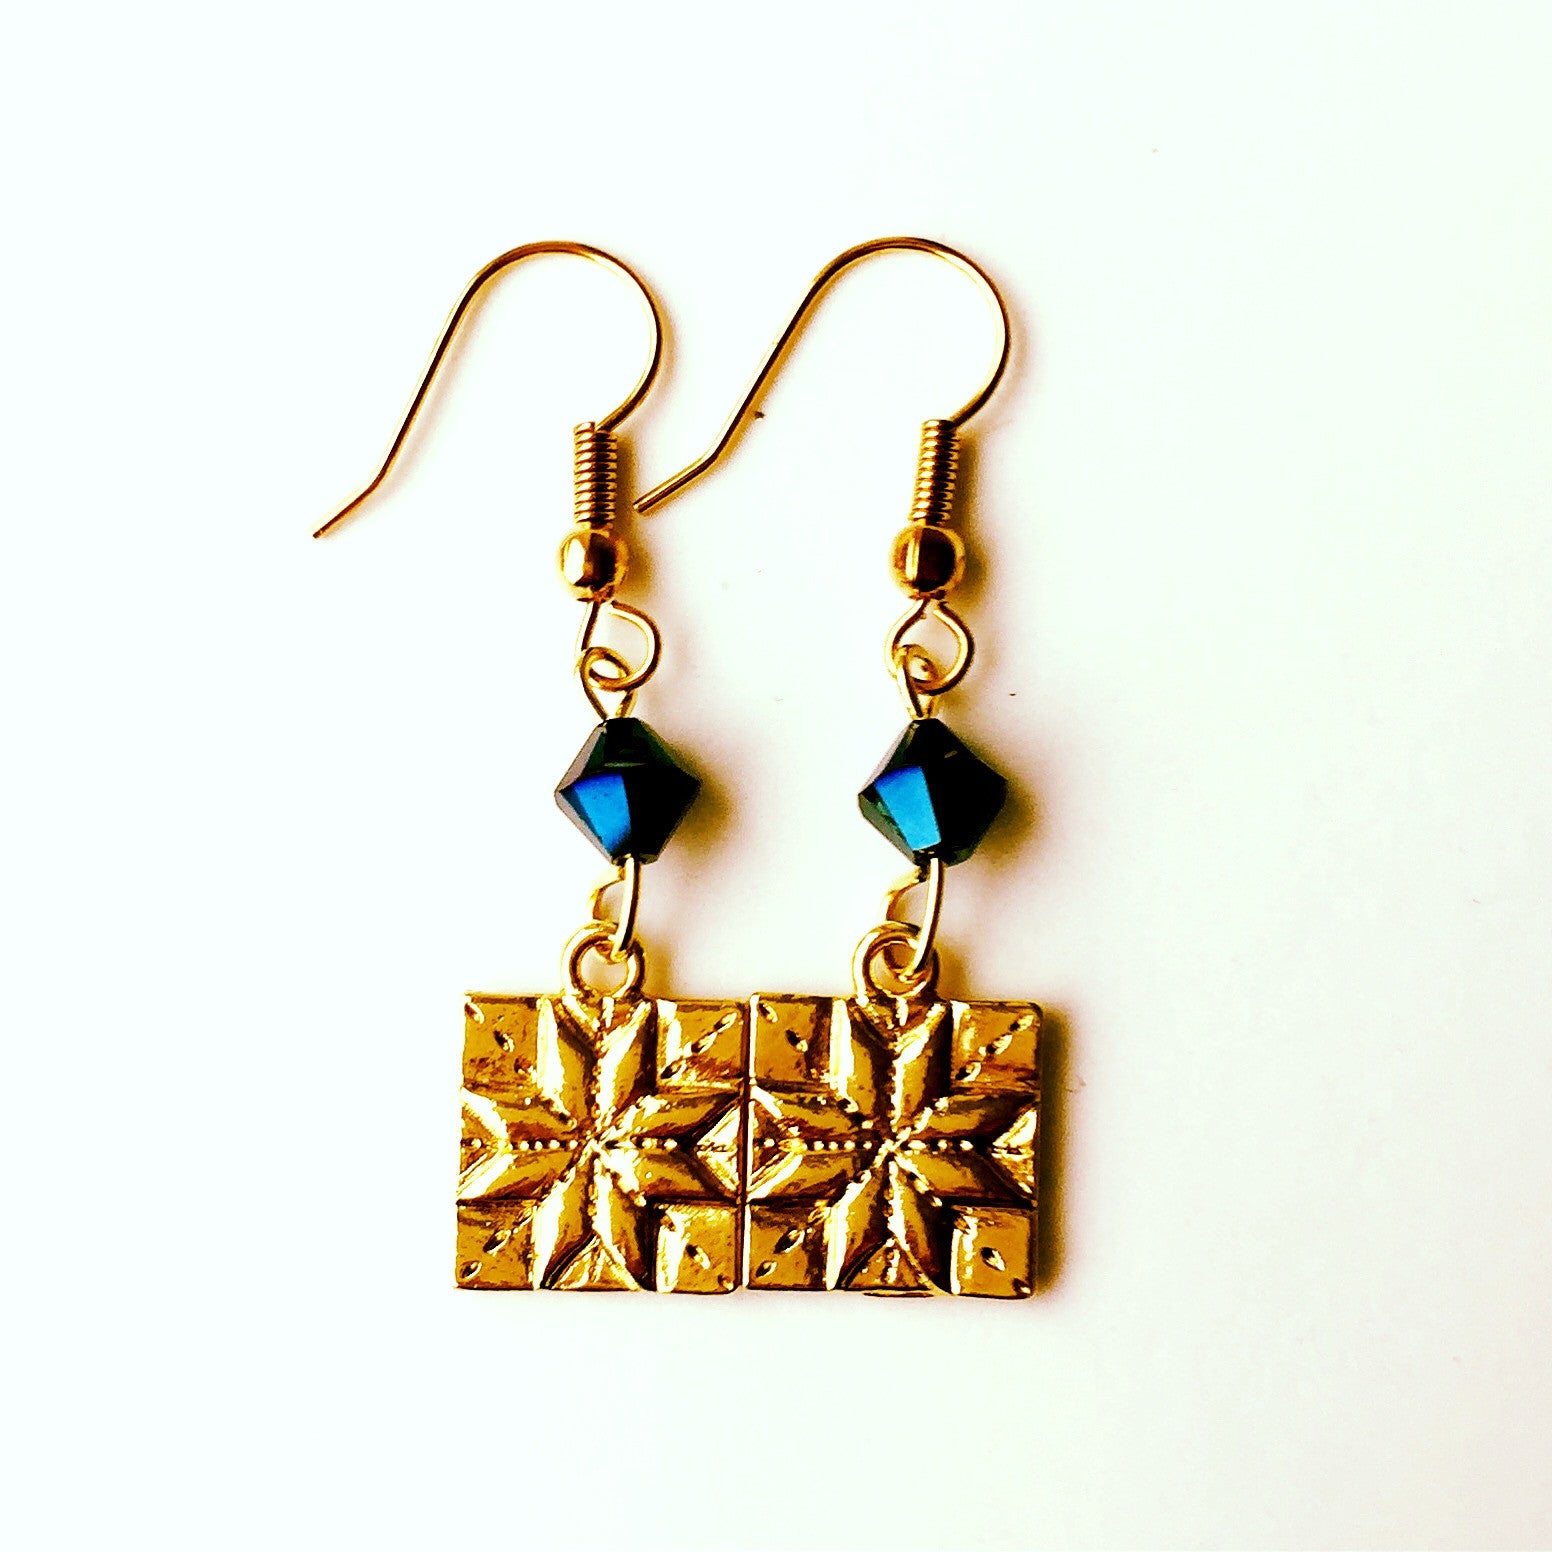 ____ Quilt Patch Gold Earrings with Blue Swarovski Crystals